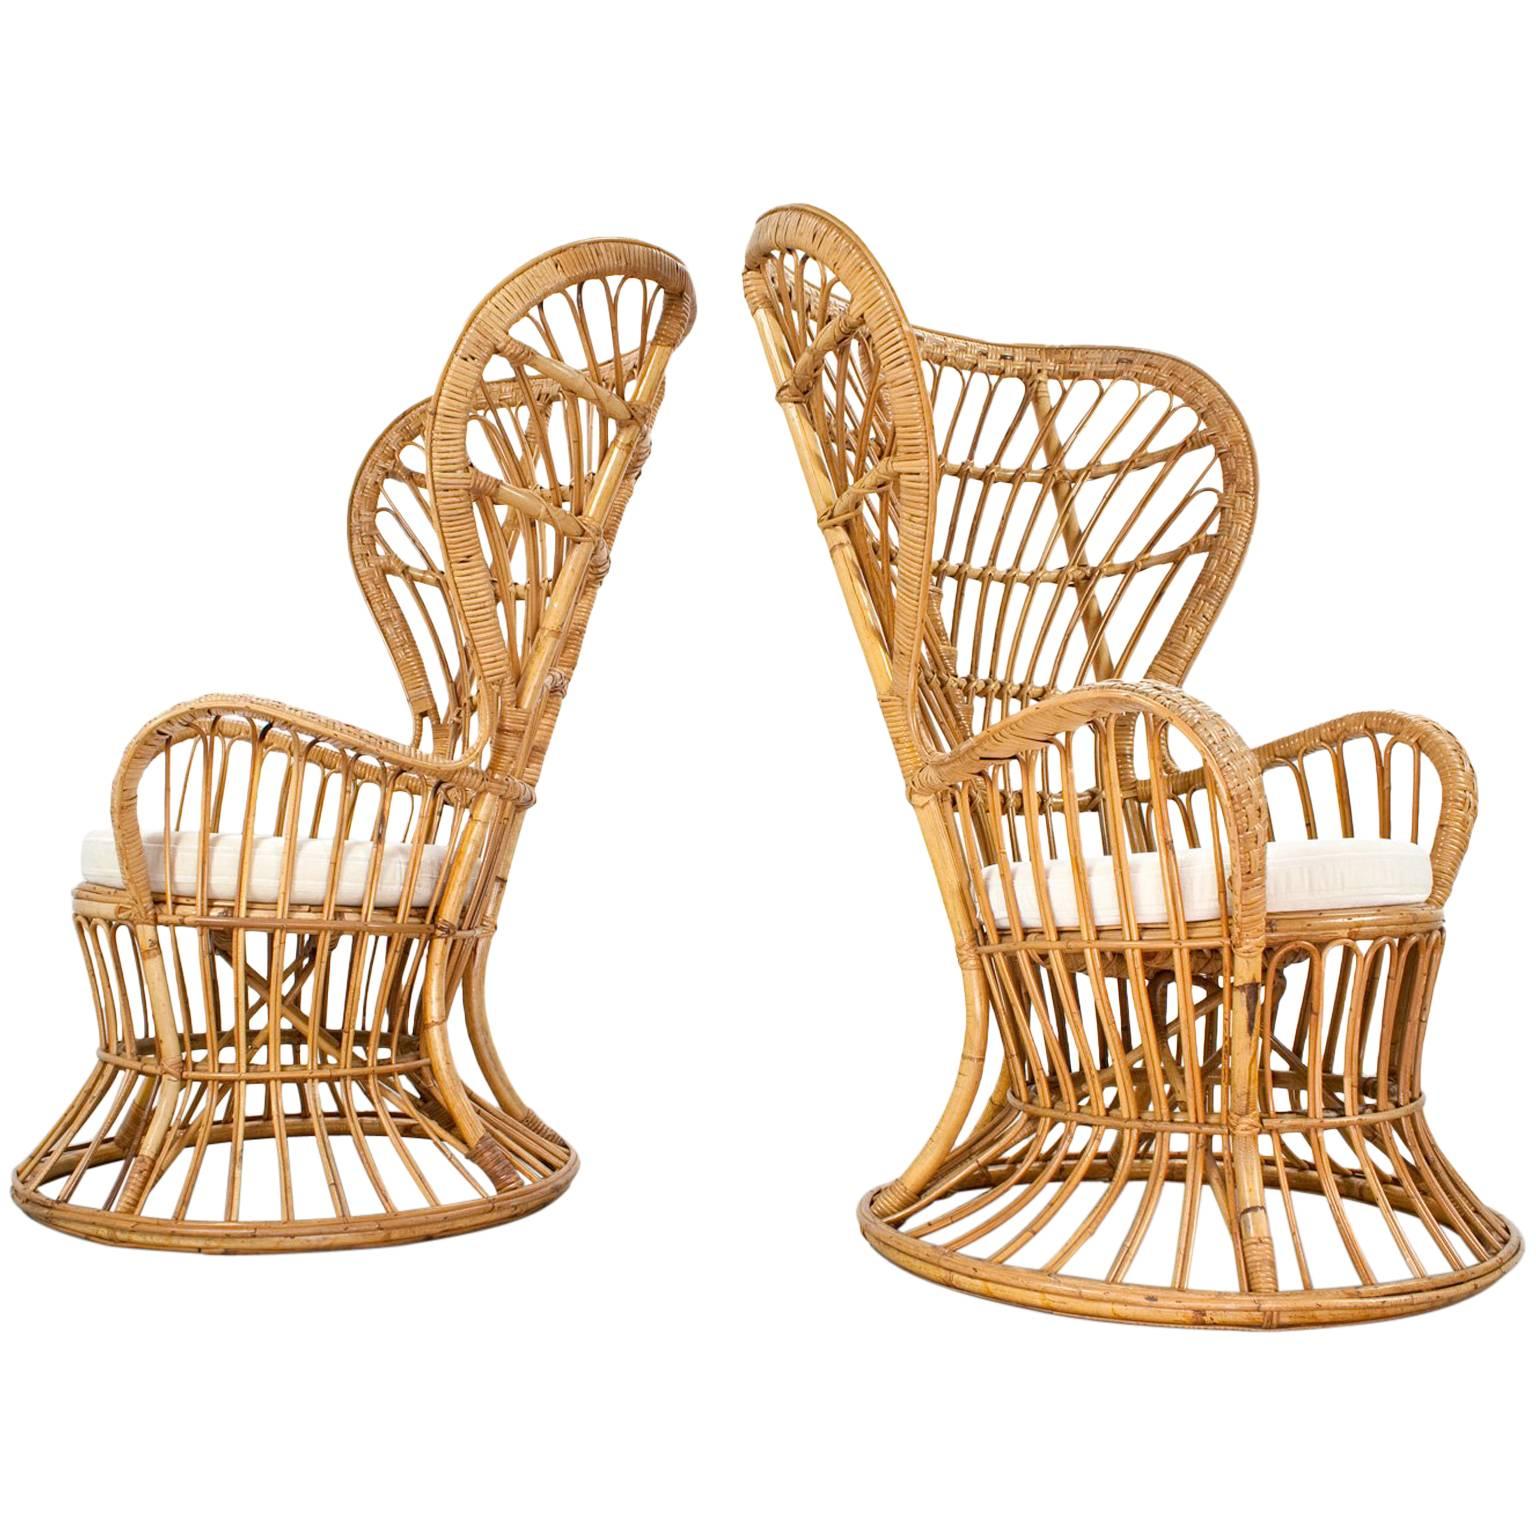 Handcrafted Rattan High Back Armchairs by Lio Carminati